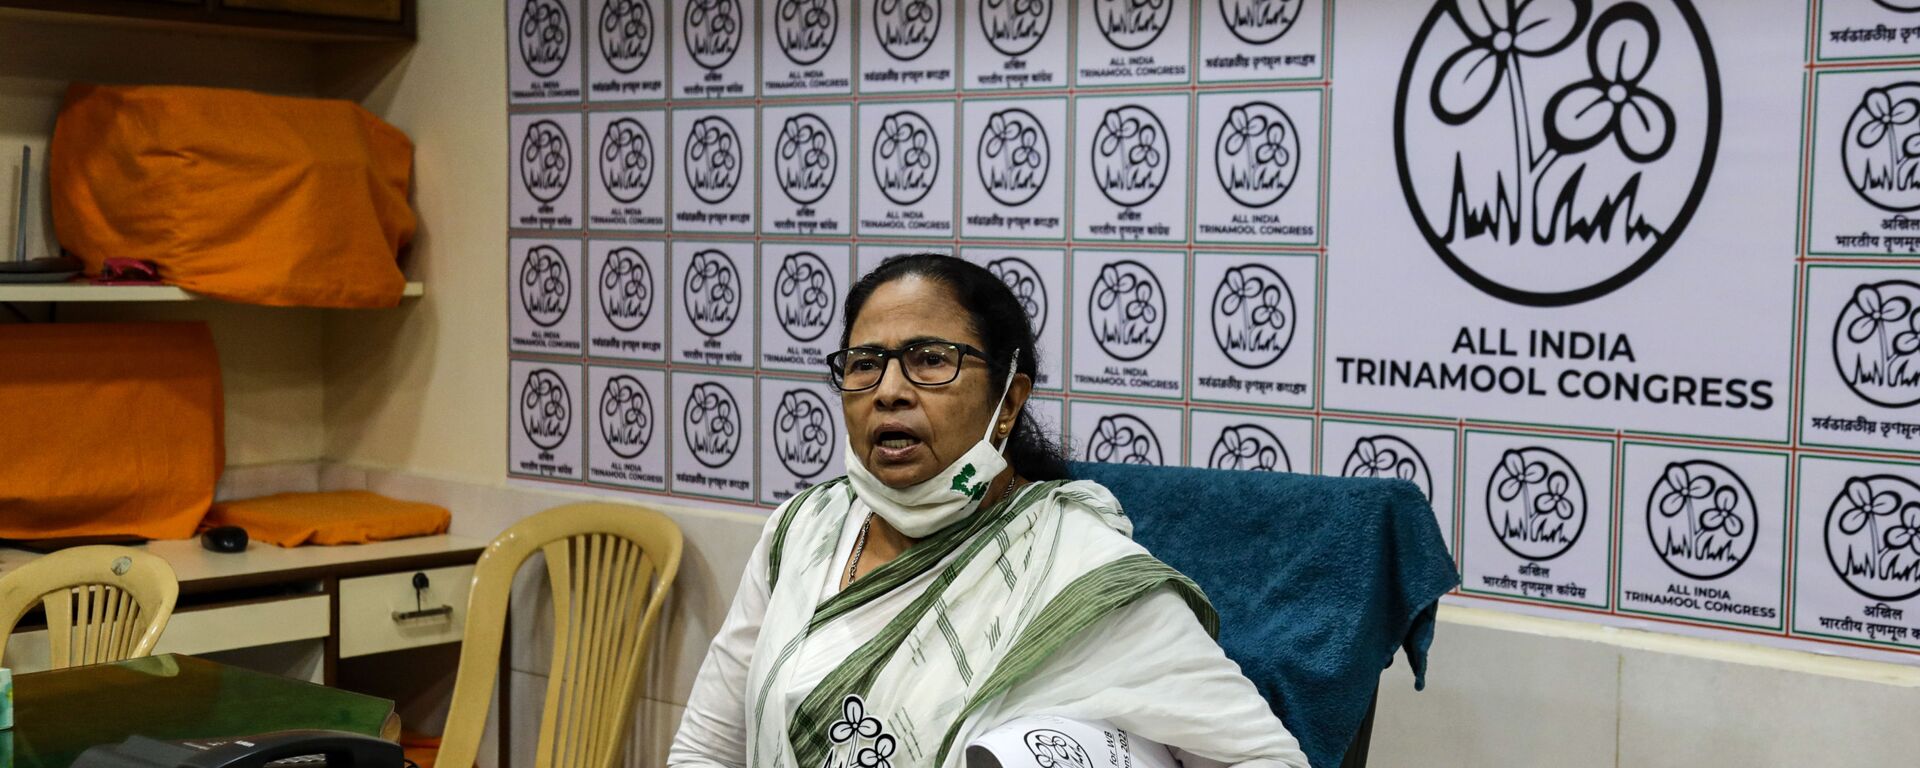 Chief Minister of West Bengal state and Trinamool Congress party leader Mamata Banerjee - Sputnik International, 1920, 04.08.2021